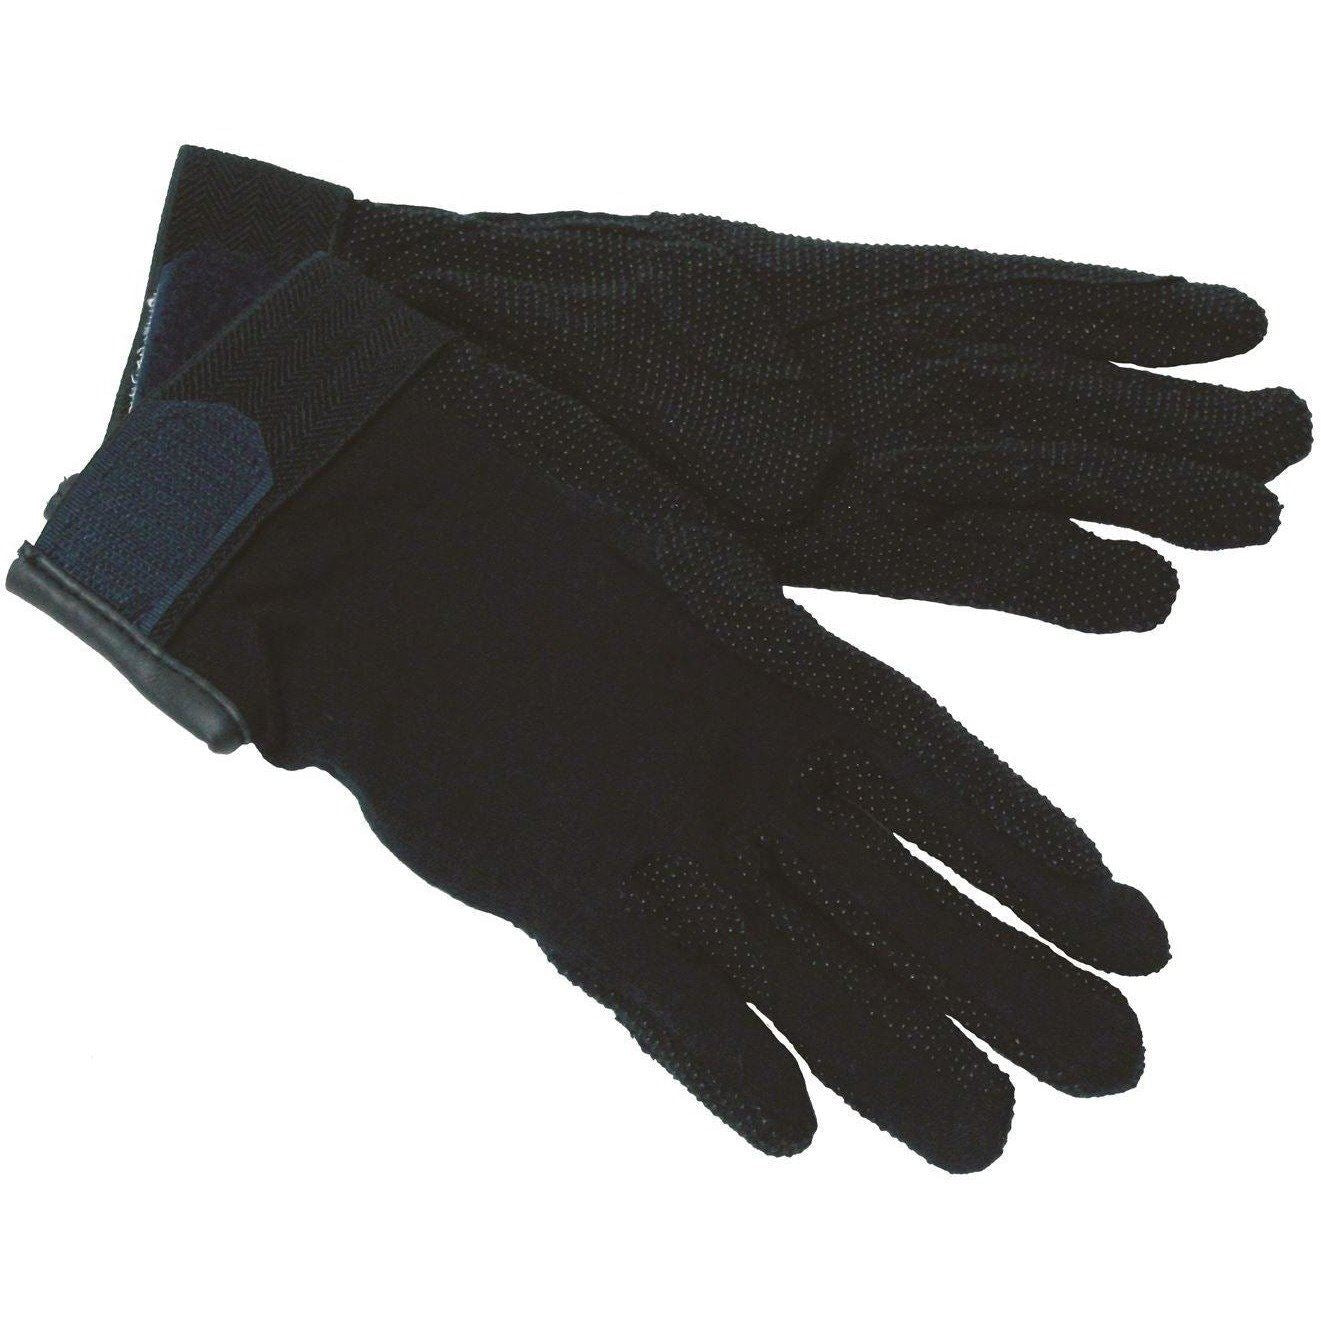 Bitz Pimple Palm Gloves - Just Horse Riders